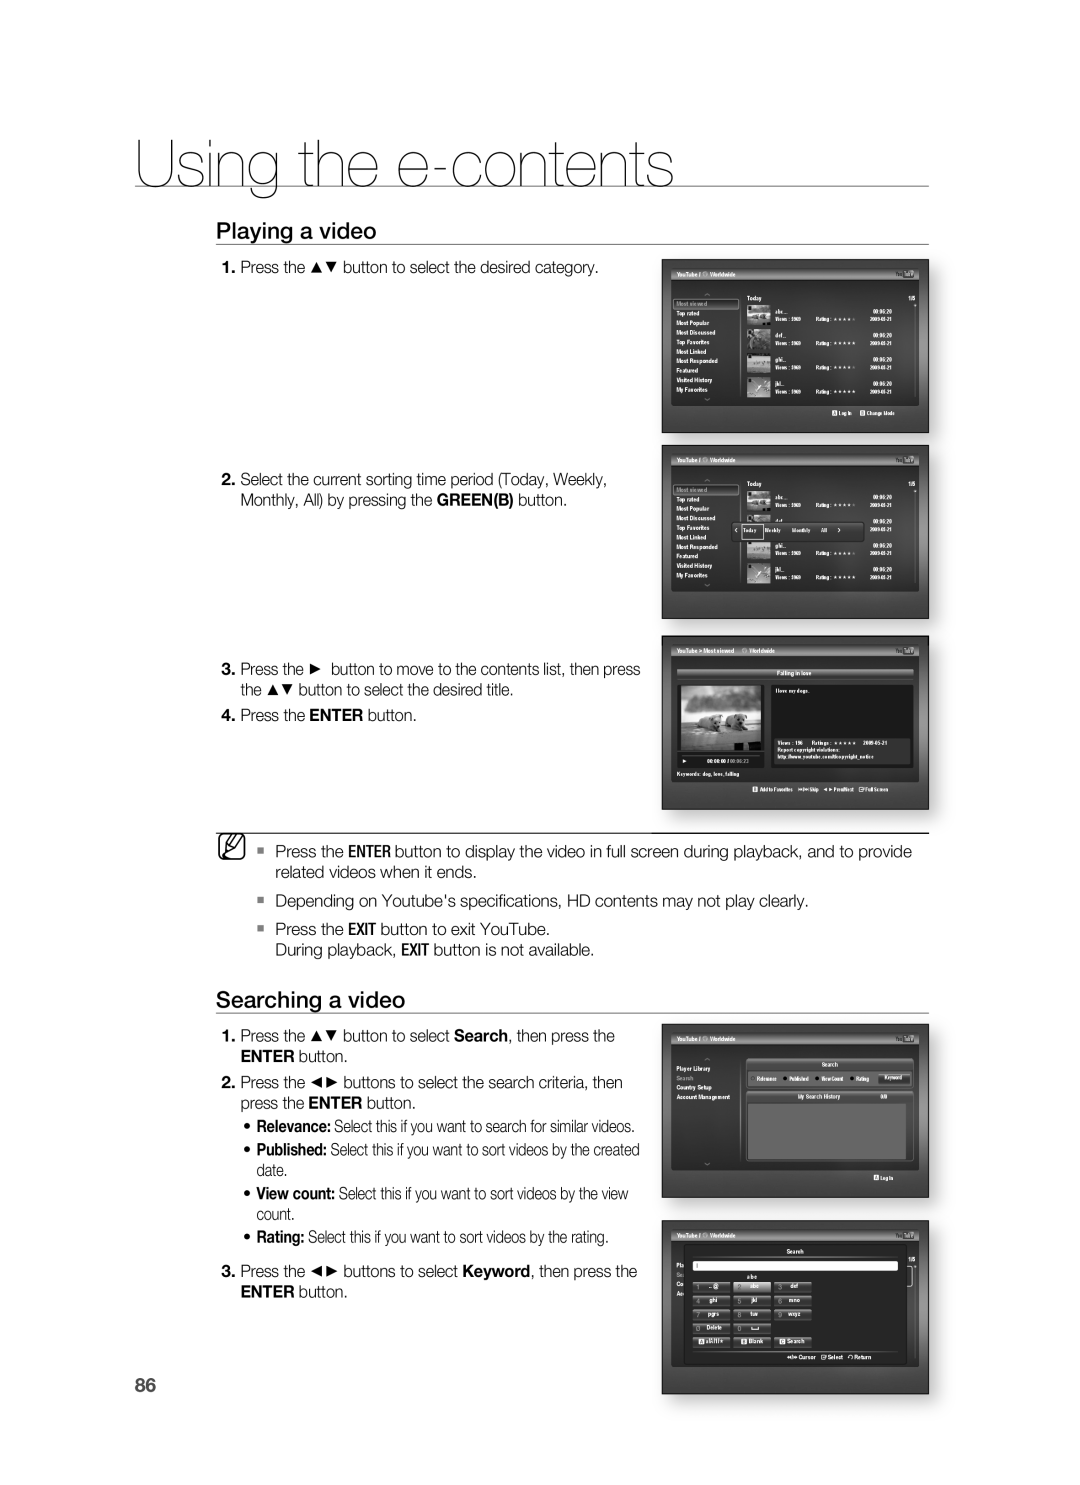 Samsung HT-BD8200 user manual Playing a video, Searching a video, Using the e-contents 